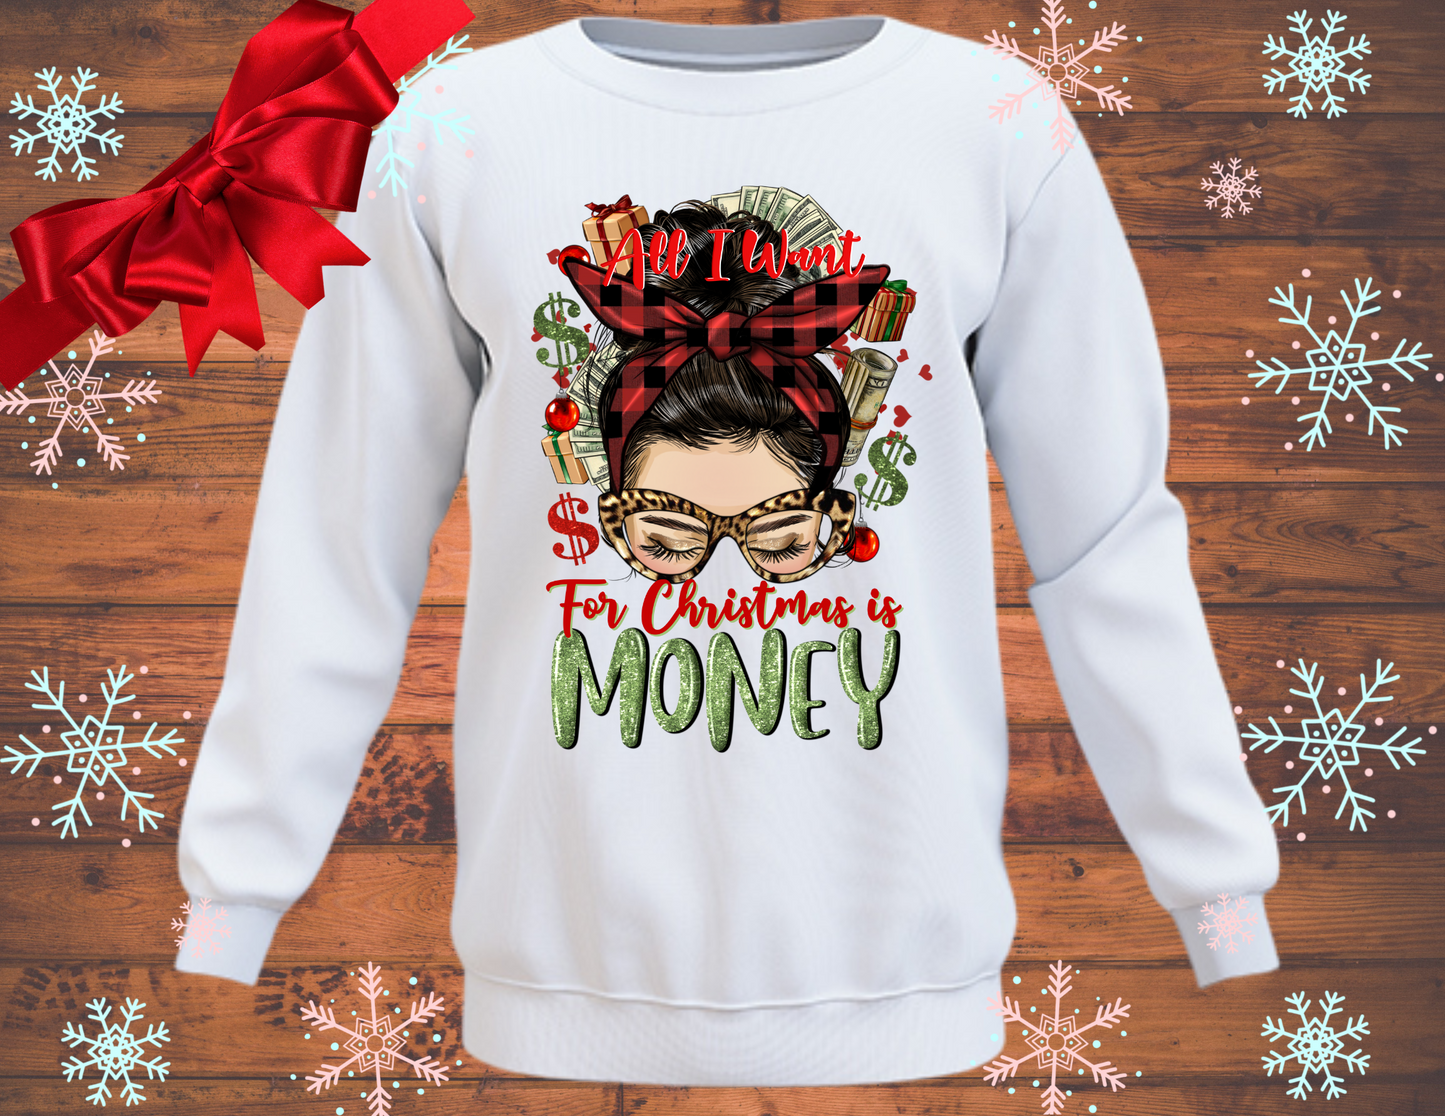 All I Want for Christmas is Money - mom life  (TRANSFER)